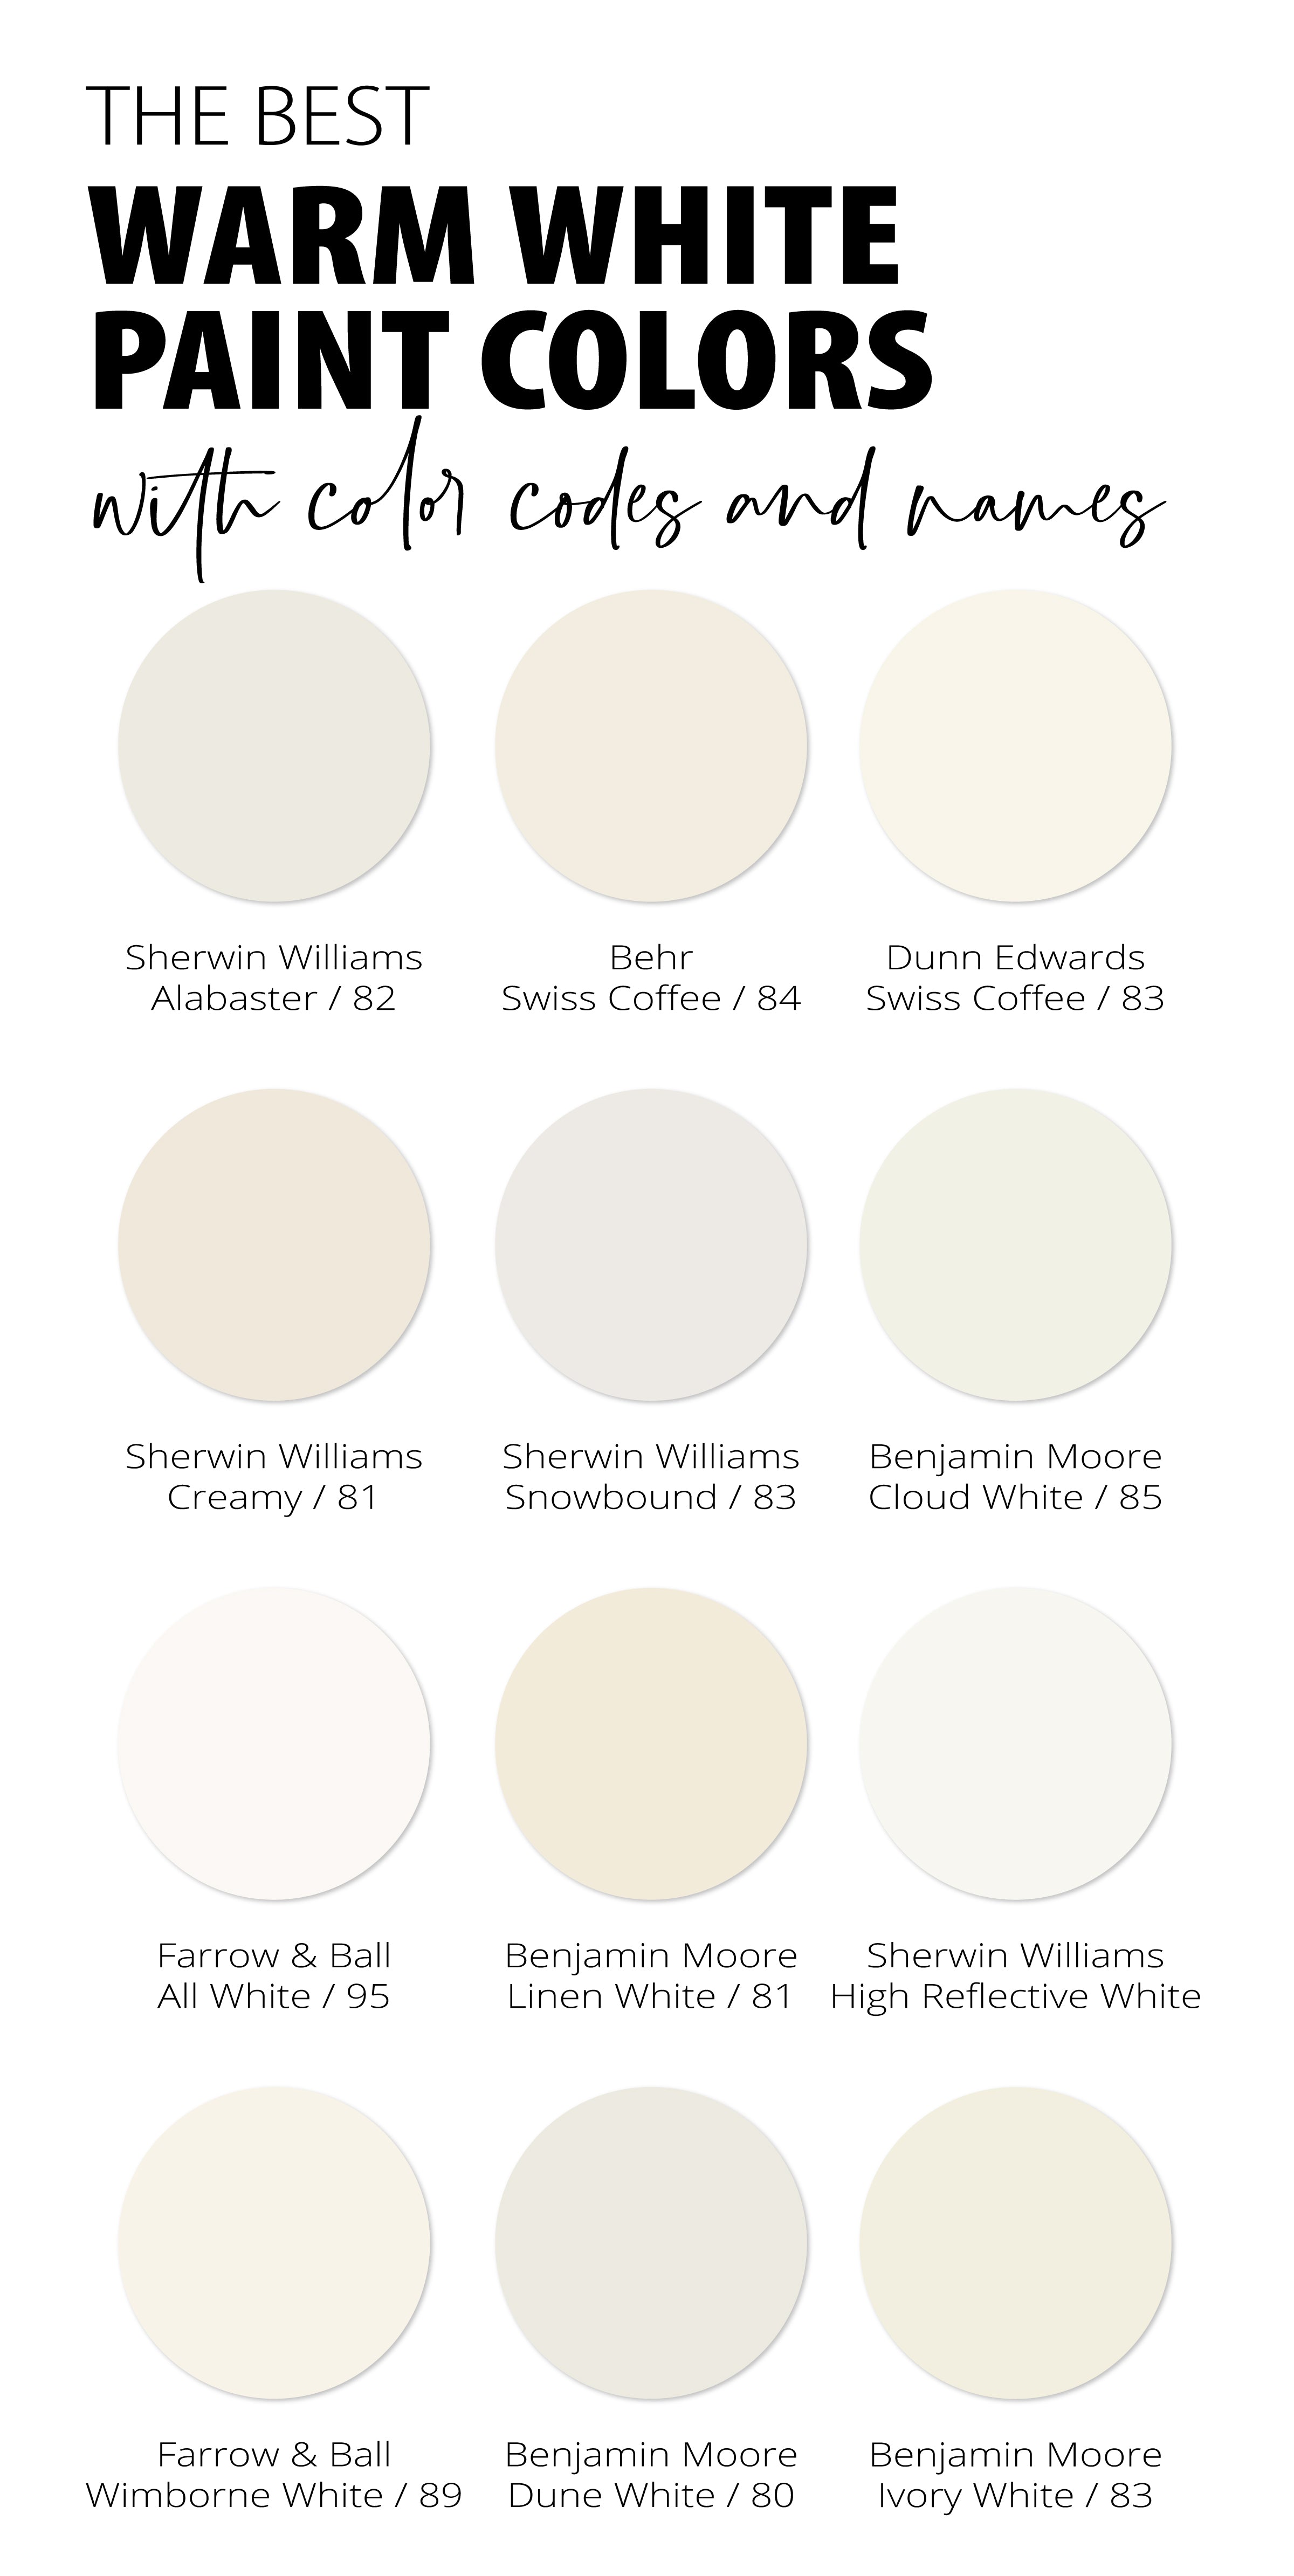 Best-Warm-White-Paint-Colors-with-Names-Colors-and-LRV-values